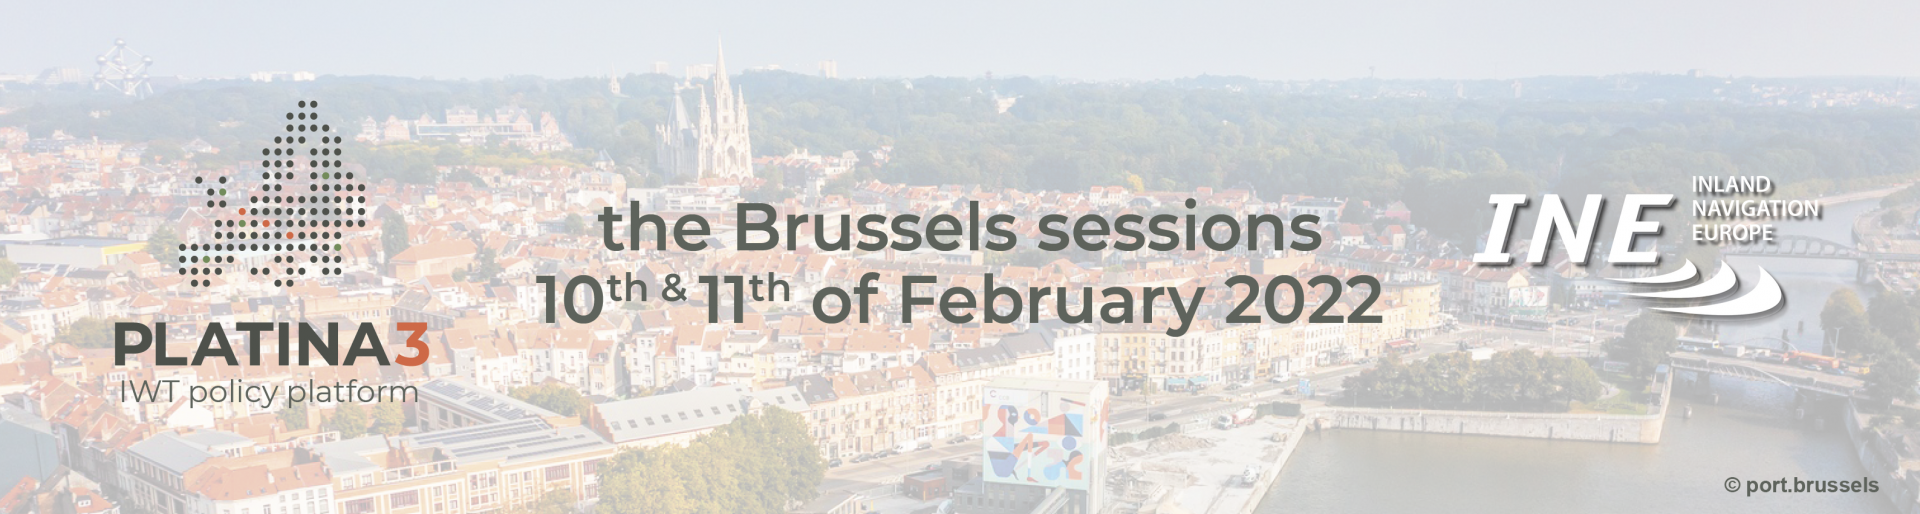 Stage 3 – the Brussels sessions